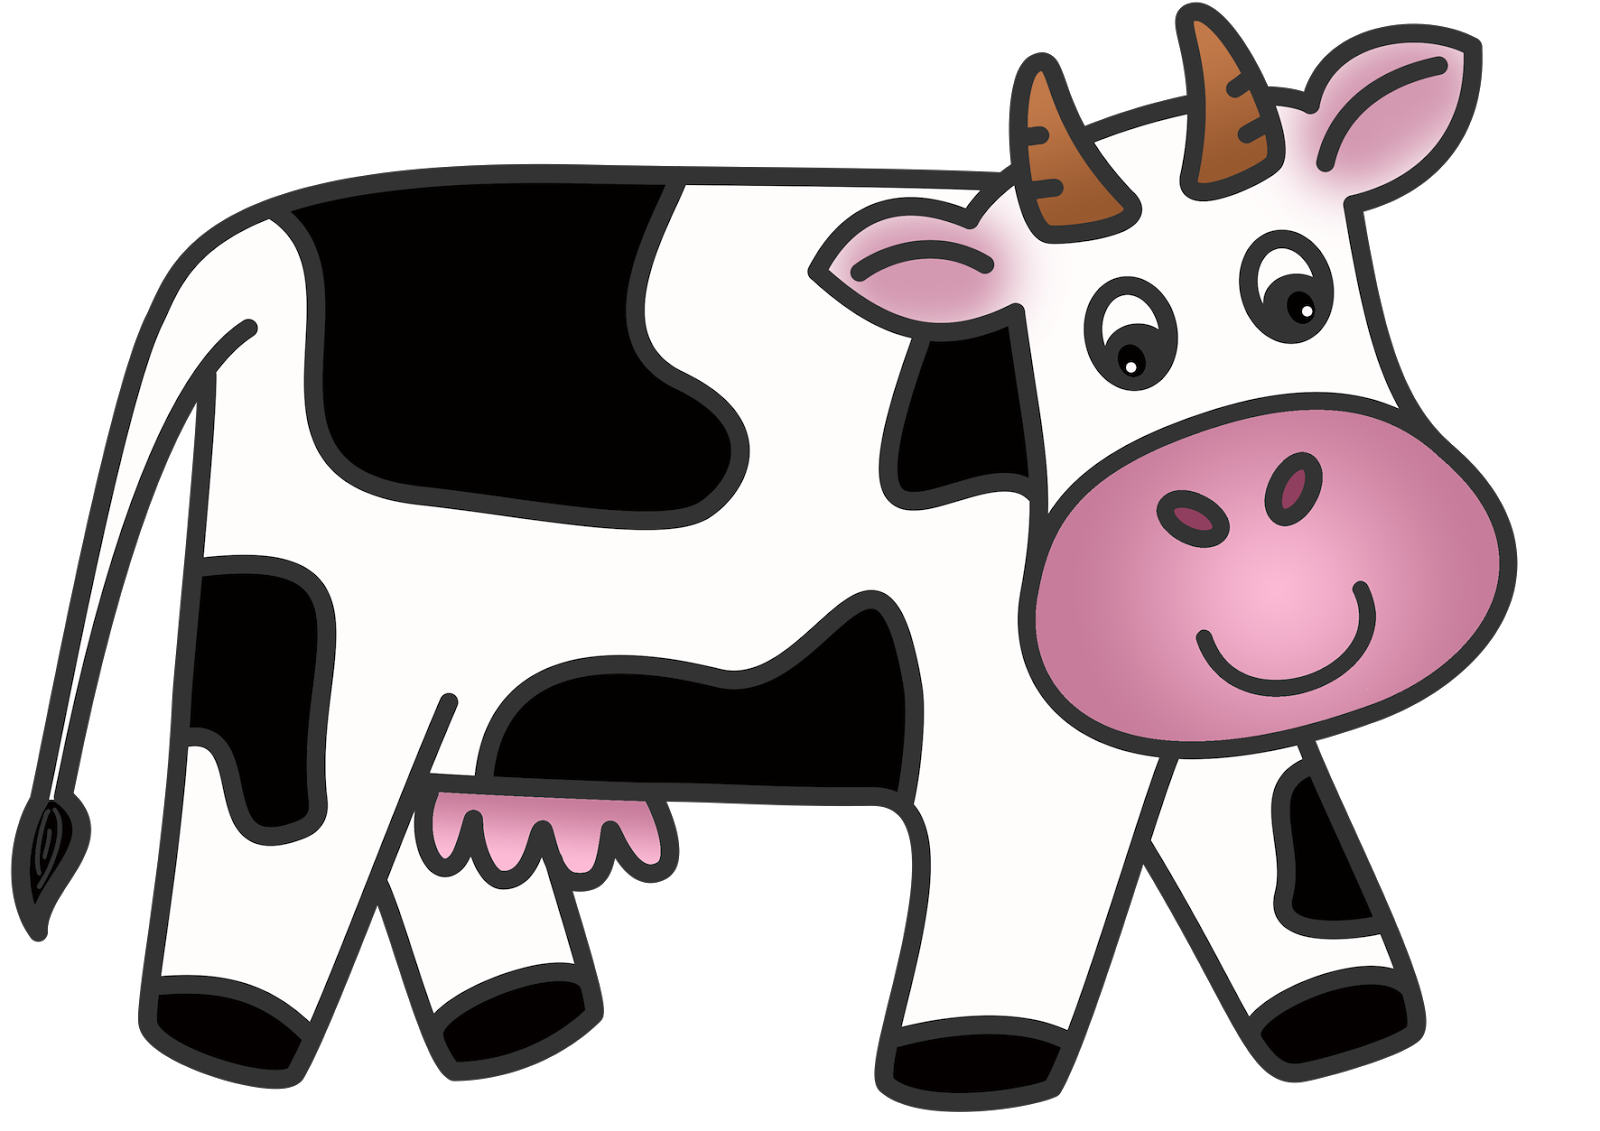 Animated dairy cow.